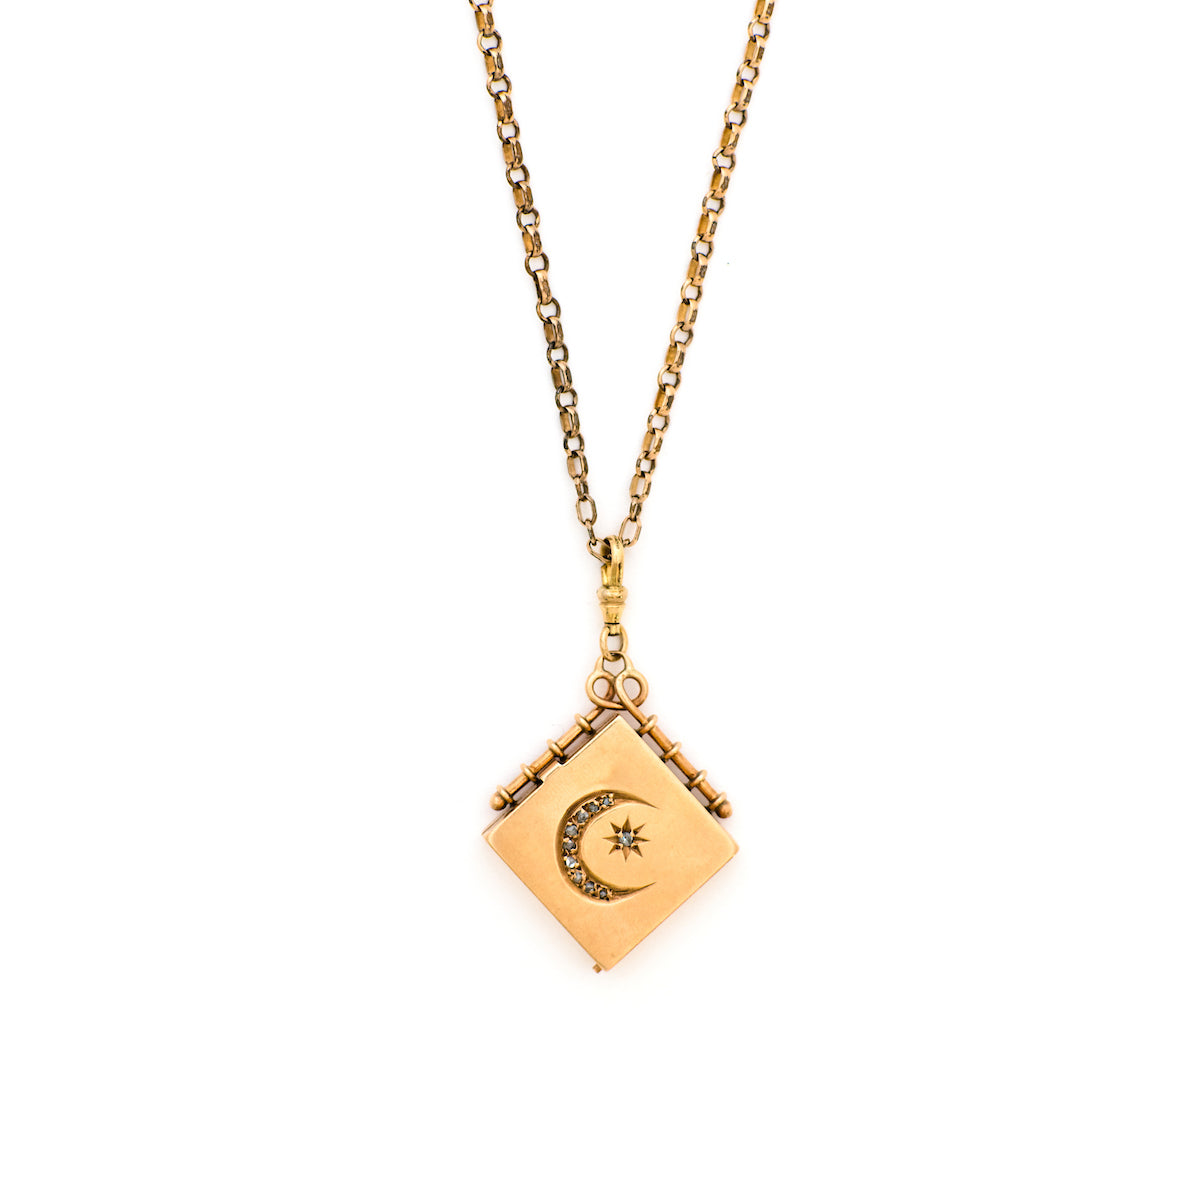 Solid 14K Gold Moon and Star Square Locket